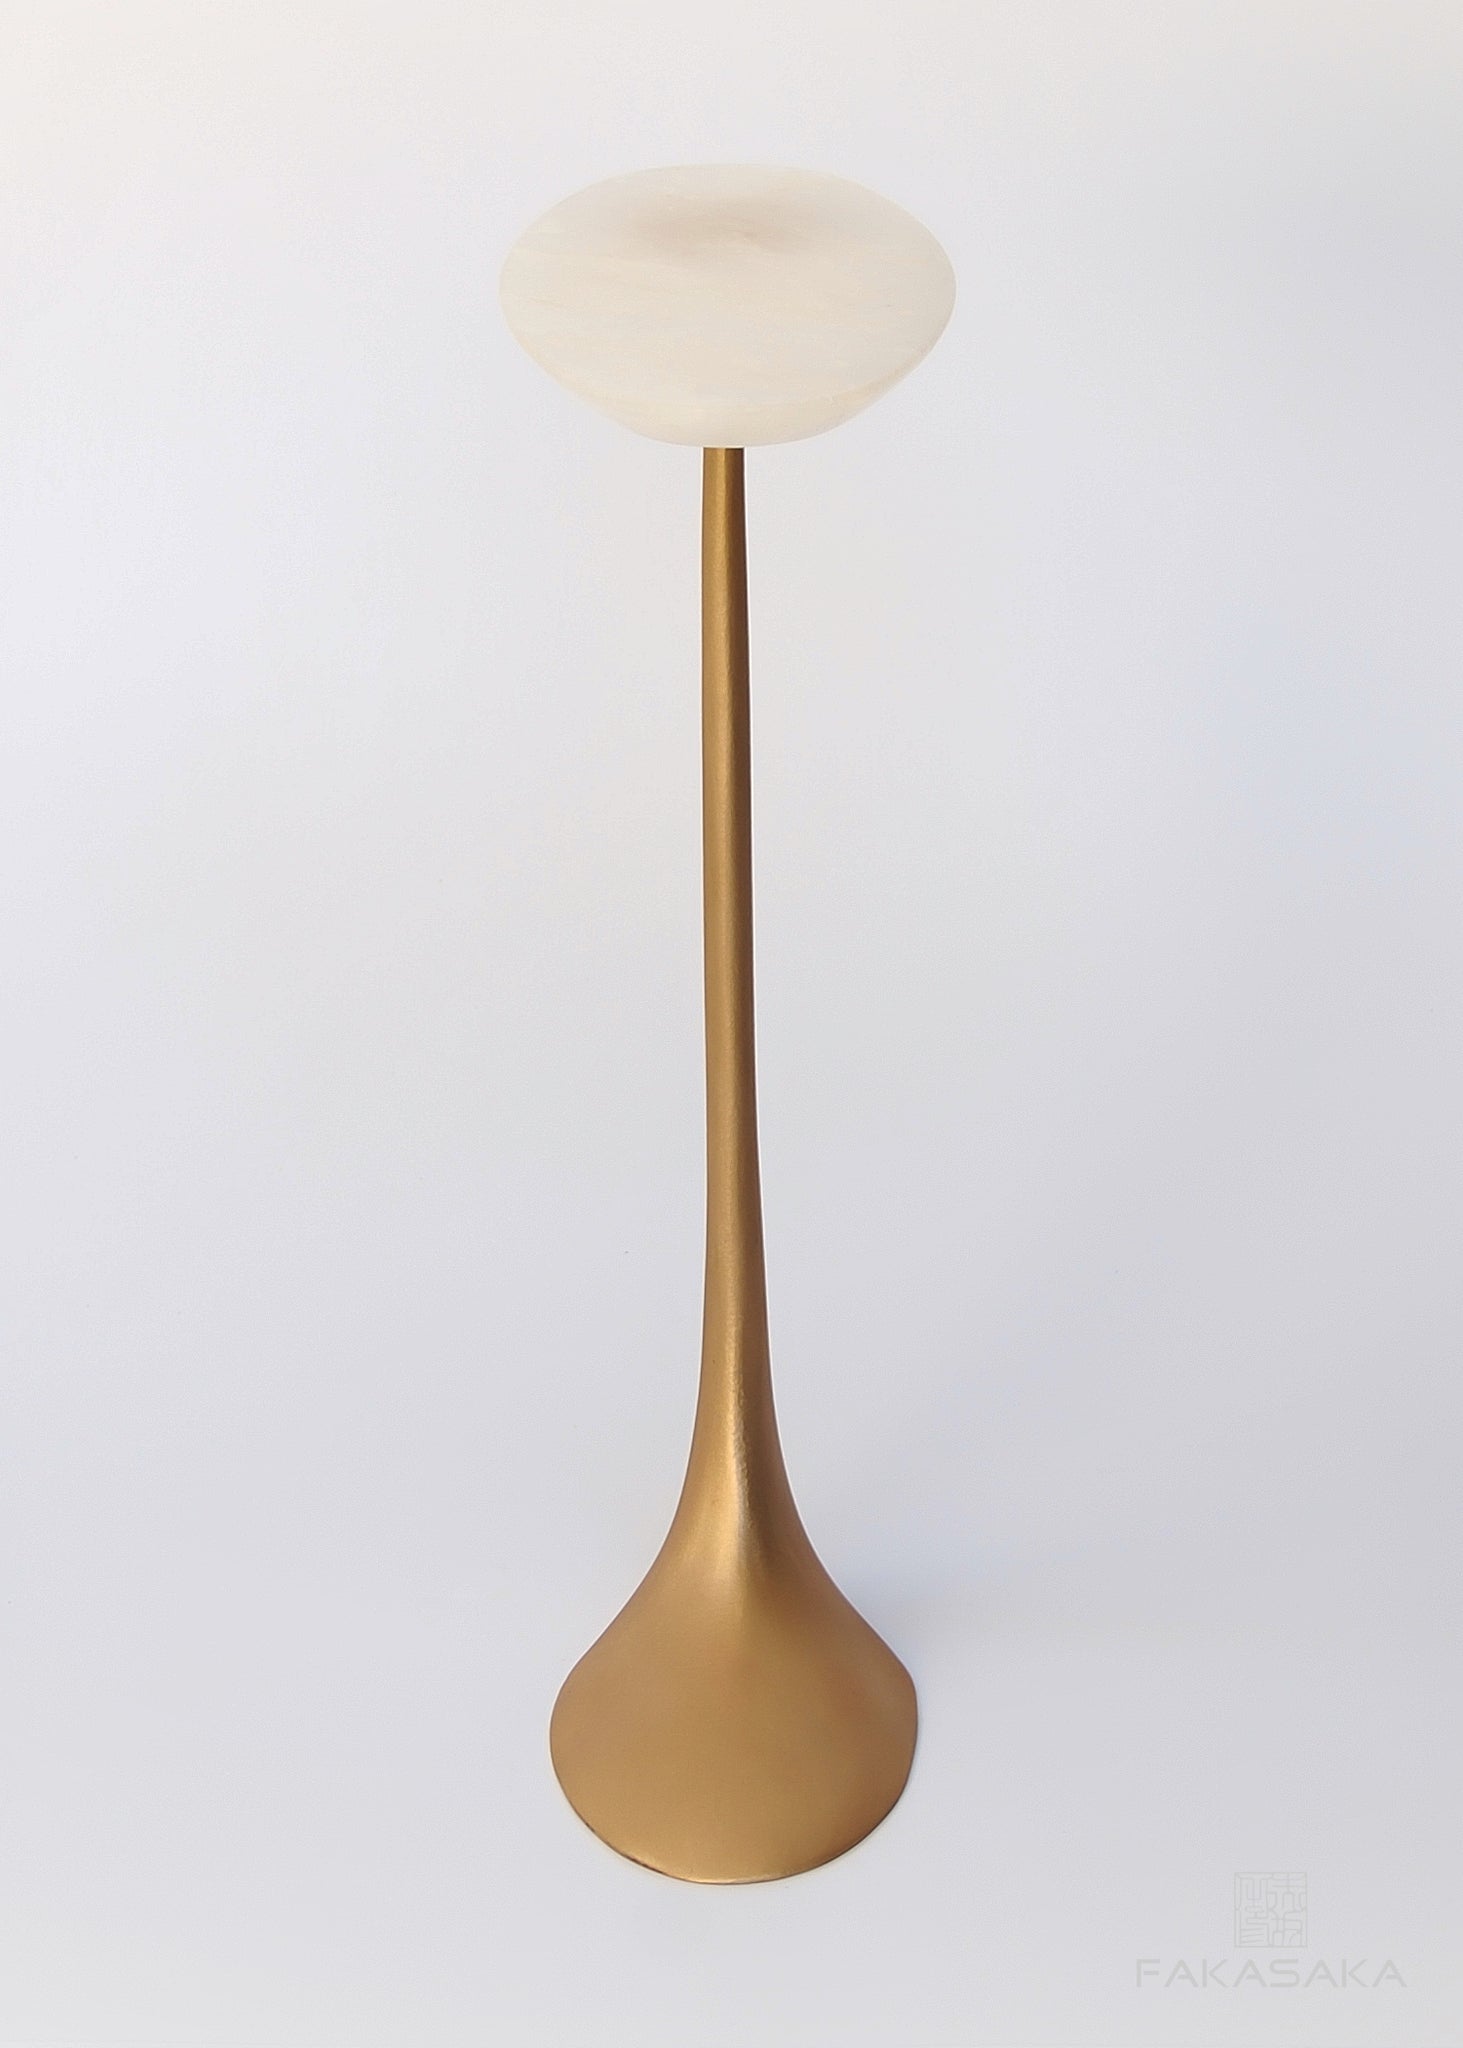 KEITH DRINK TABLE<br><br>ONYX<br>POLISHED TEXTURED BRONZE